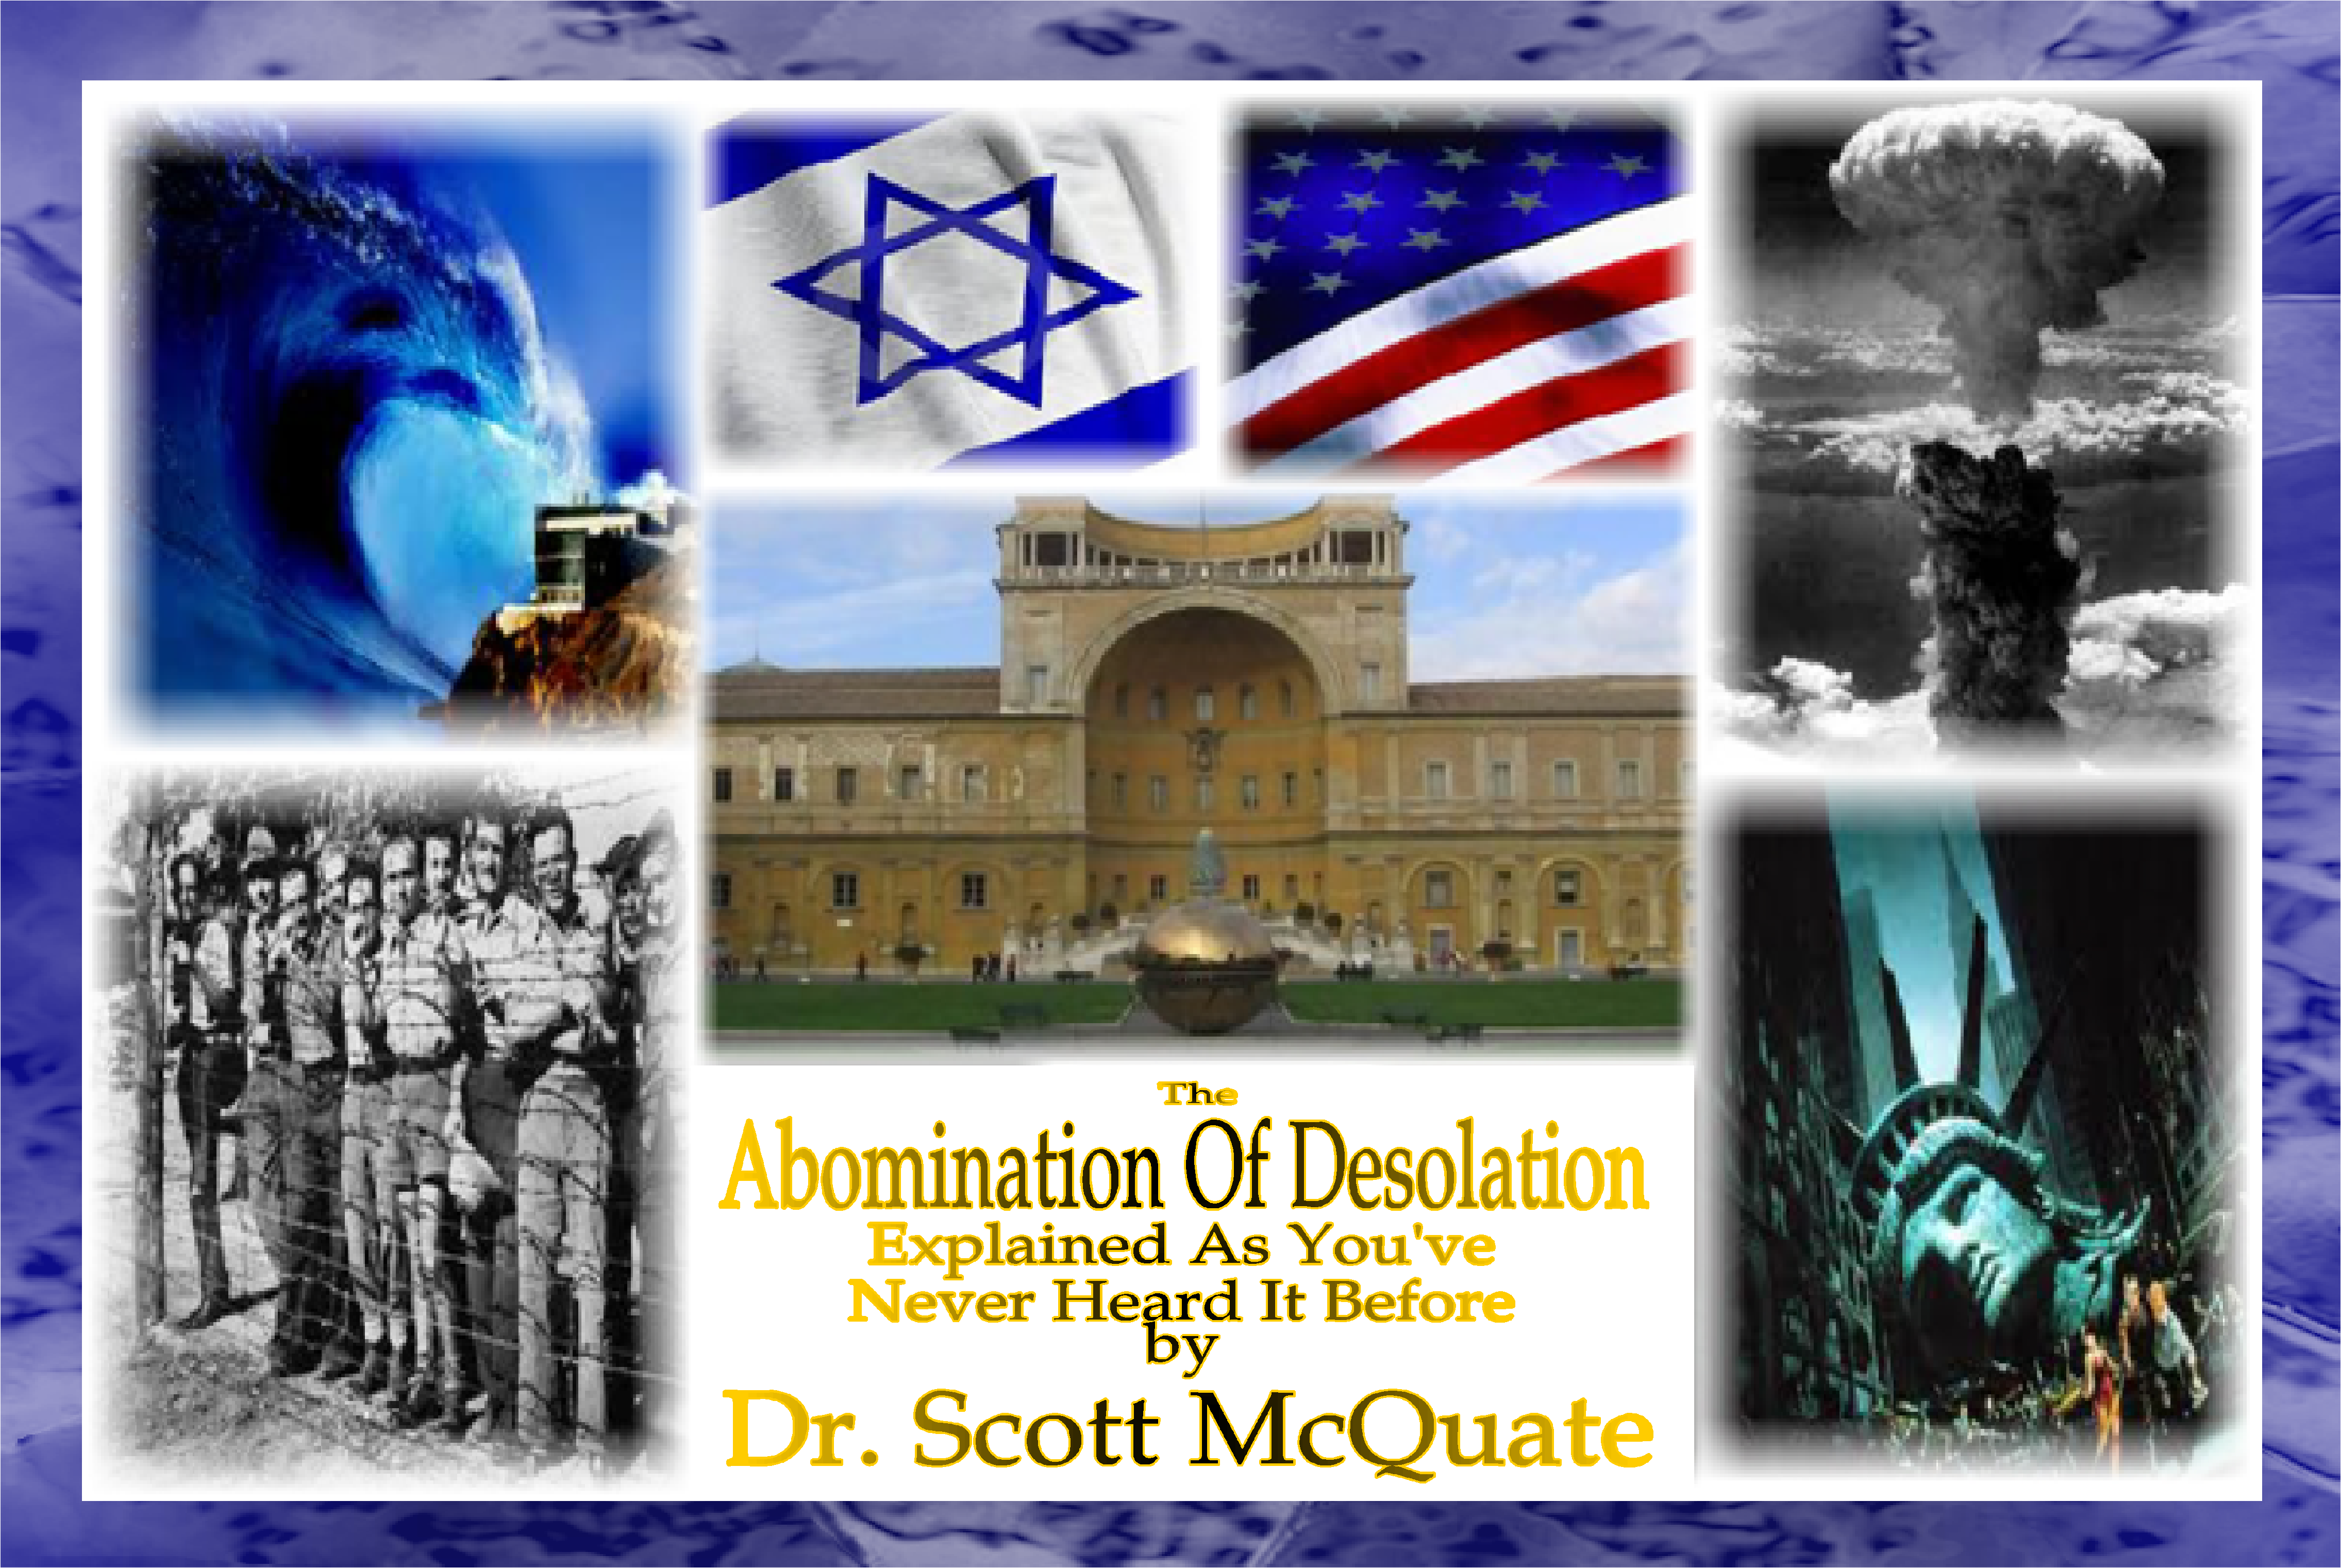 The Abomination Of Desolation Explained By Dr. Scott Mcquate